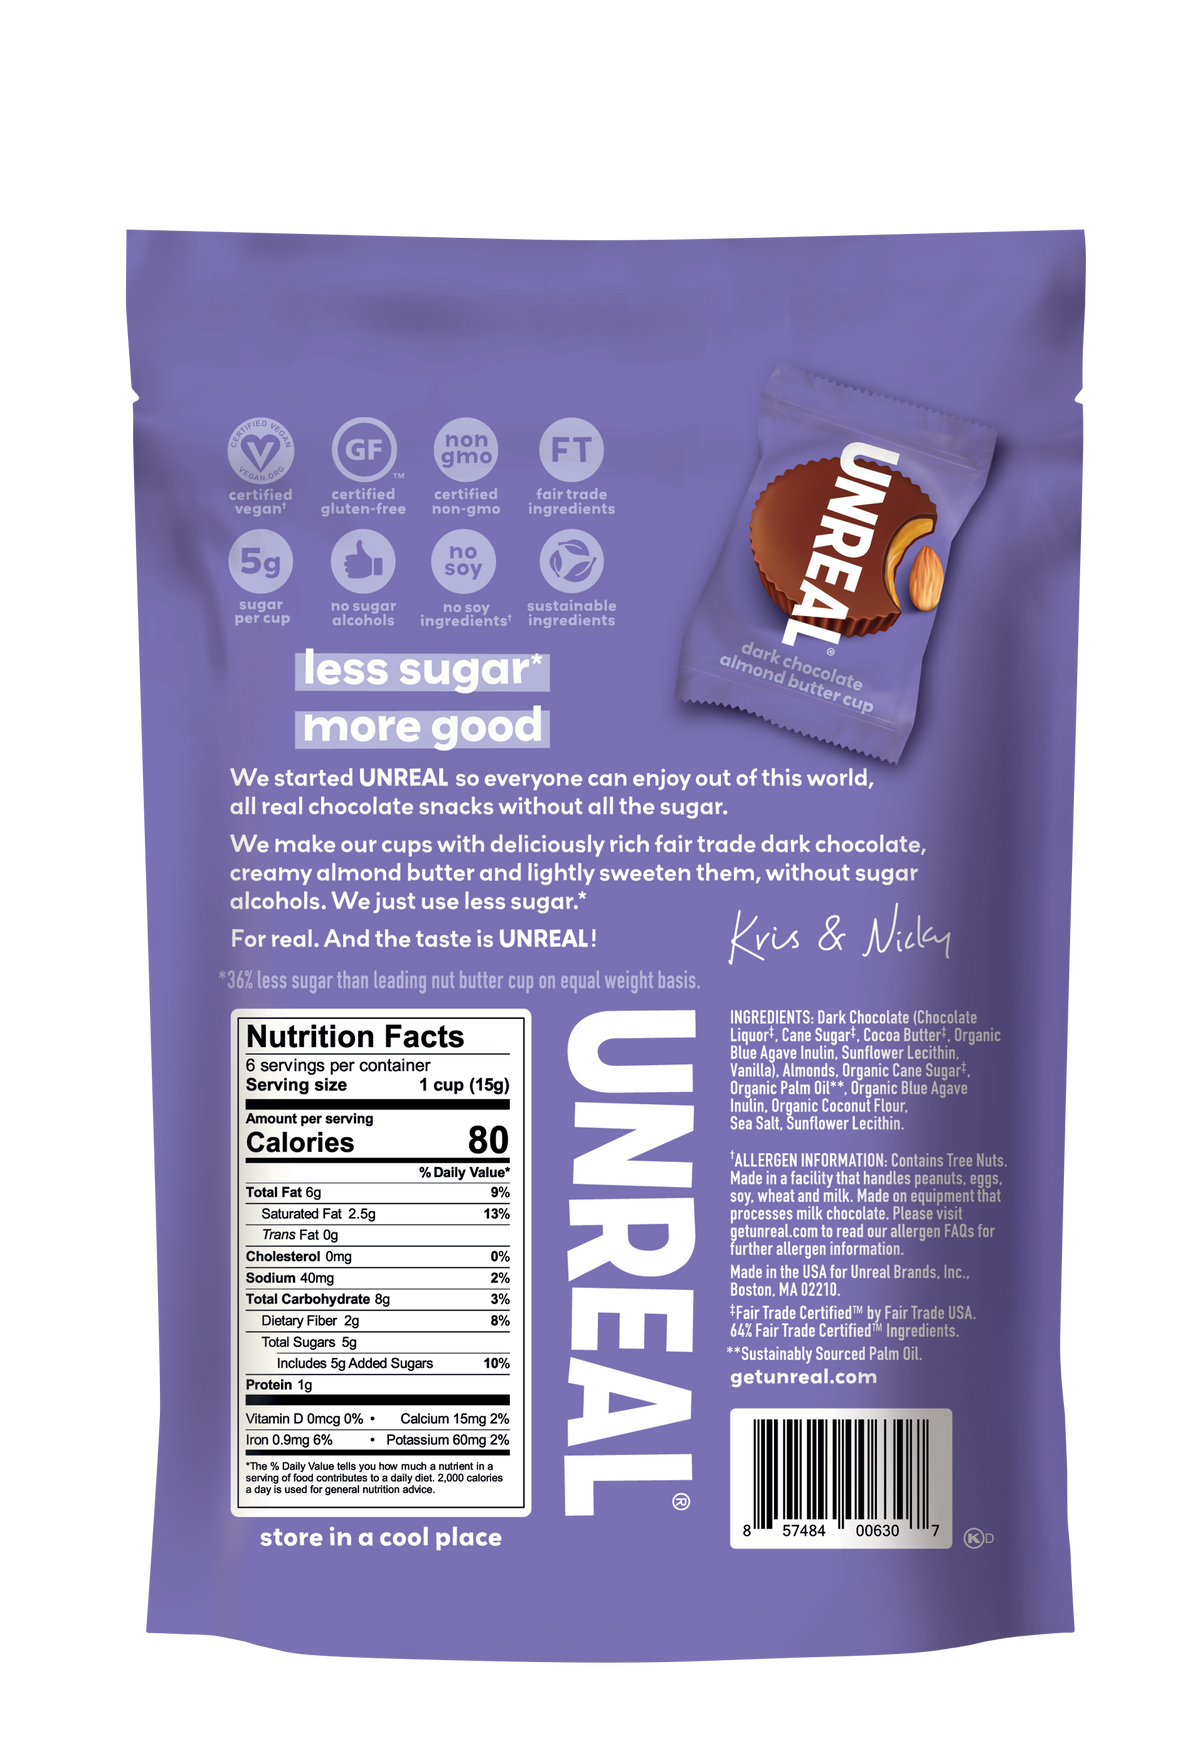 UnReal Mini Dark Chocolate Almond Butter Cups Pouch Bag 3.2oz (6ct)